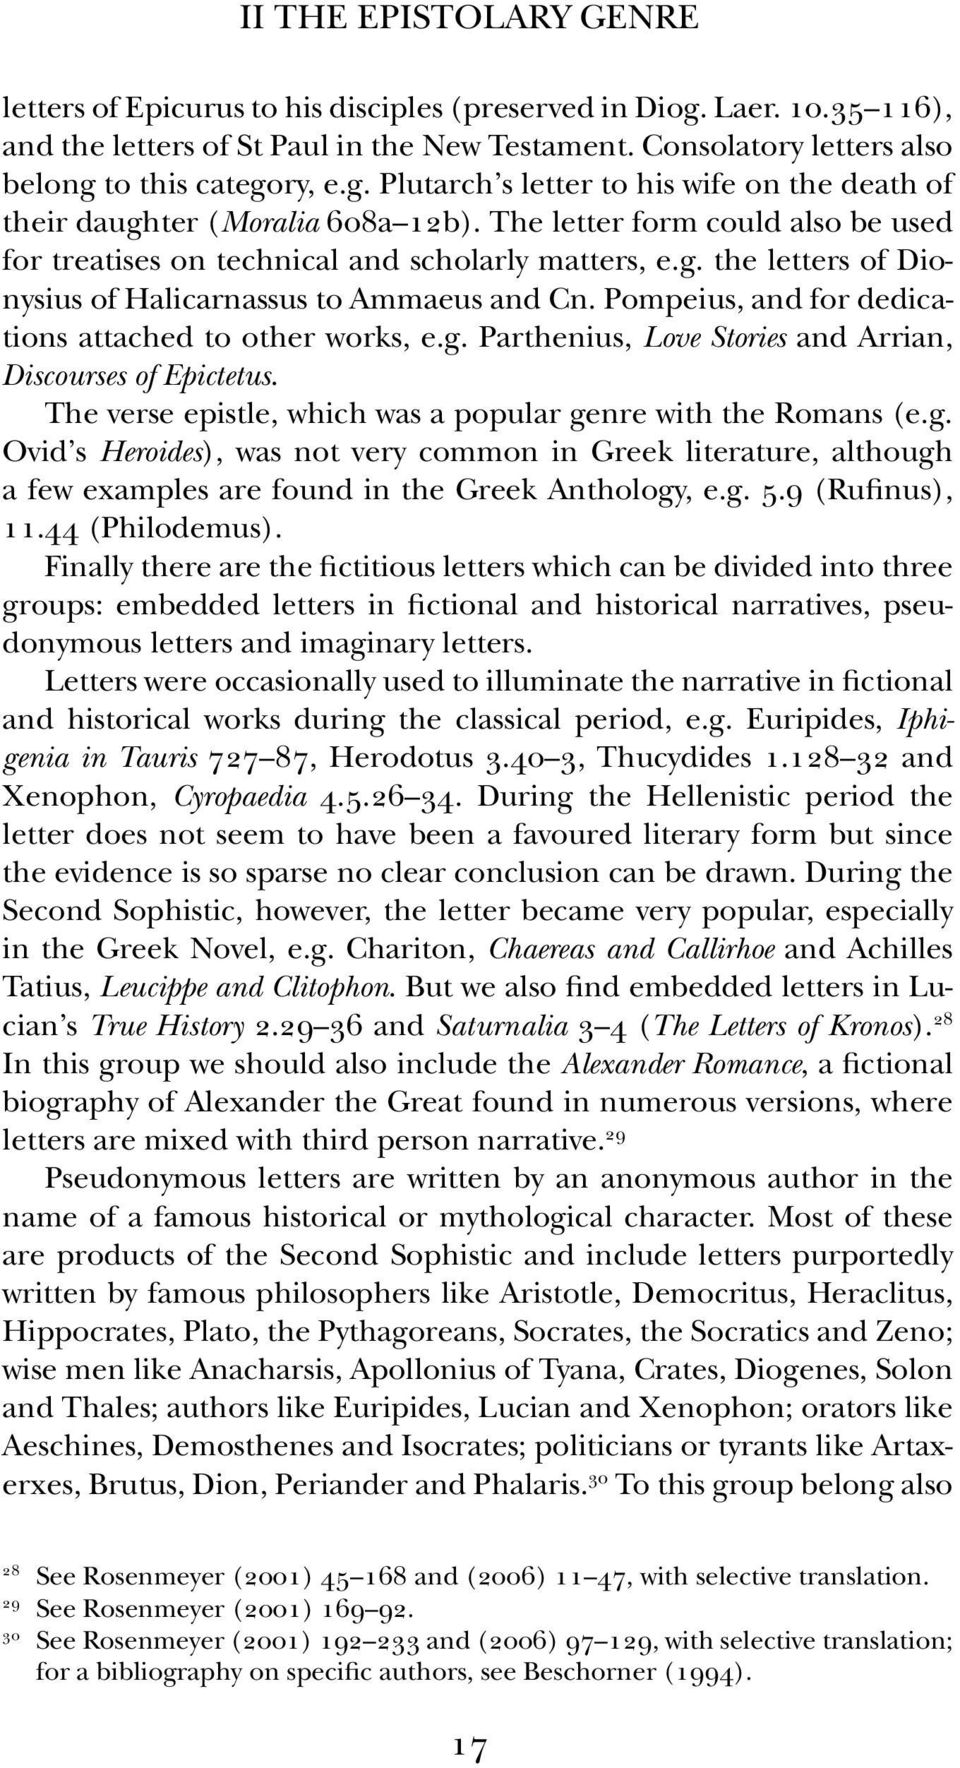 pompeius, and for dedications attached to other works, e.g. parthenius, Love Stories and Arrian, Discourses of Epictetus. the verse epistle, which was a popular genre with the romans (e.g. ovid s Heroides), was not very common in Greek literature, although a few examples are found in the Greek Anthology, e.